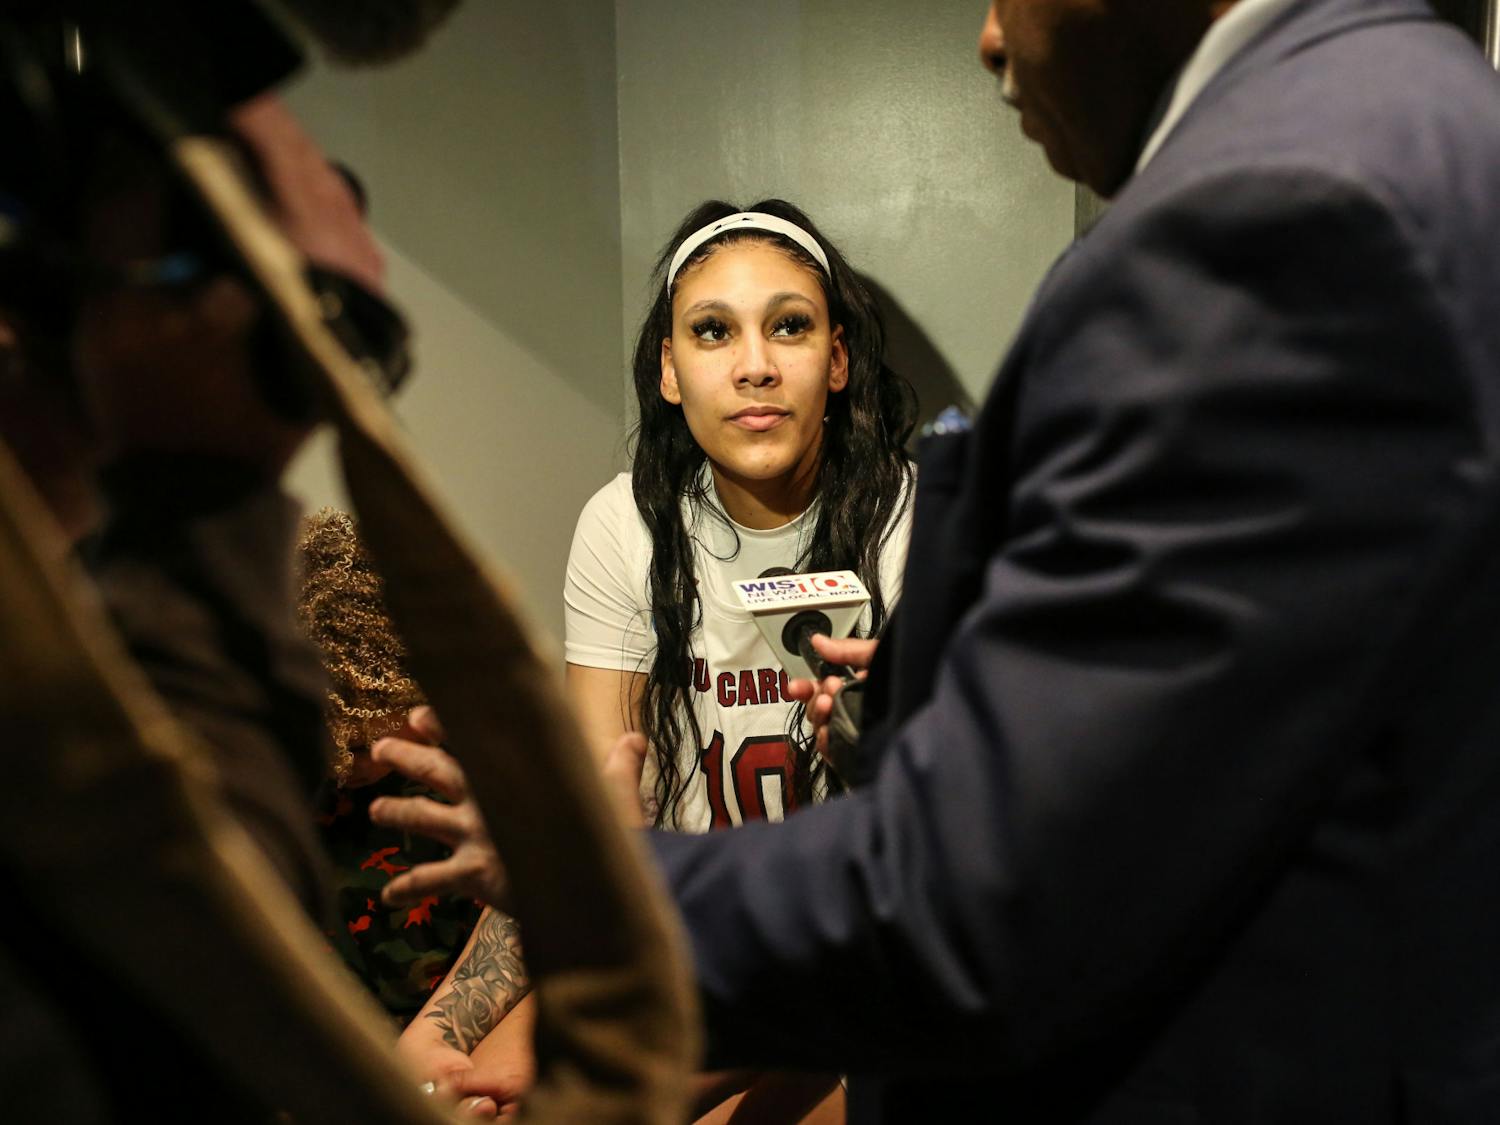 Junior center Kamilla Cardoso is interviewed by WIS News 10 in the locker room following South Carolina’s win against South Florida in round two of the NCAA tournament at Colonial Life Arena on March 19, 2023. The Gamecocks defeated the Bulls 76-45.